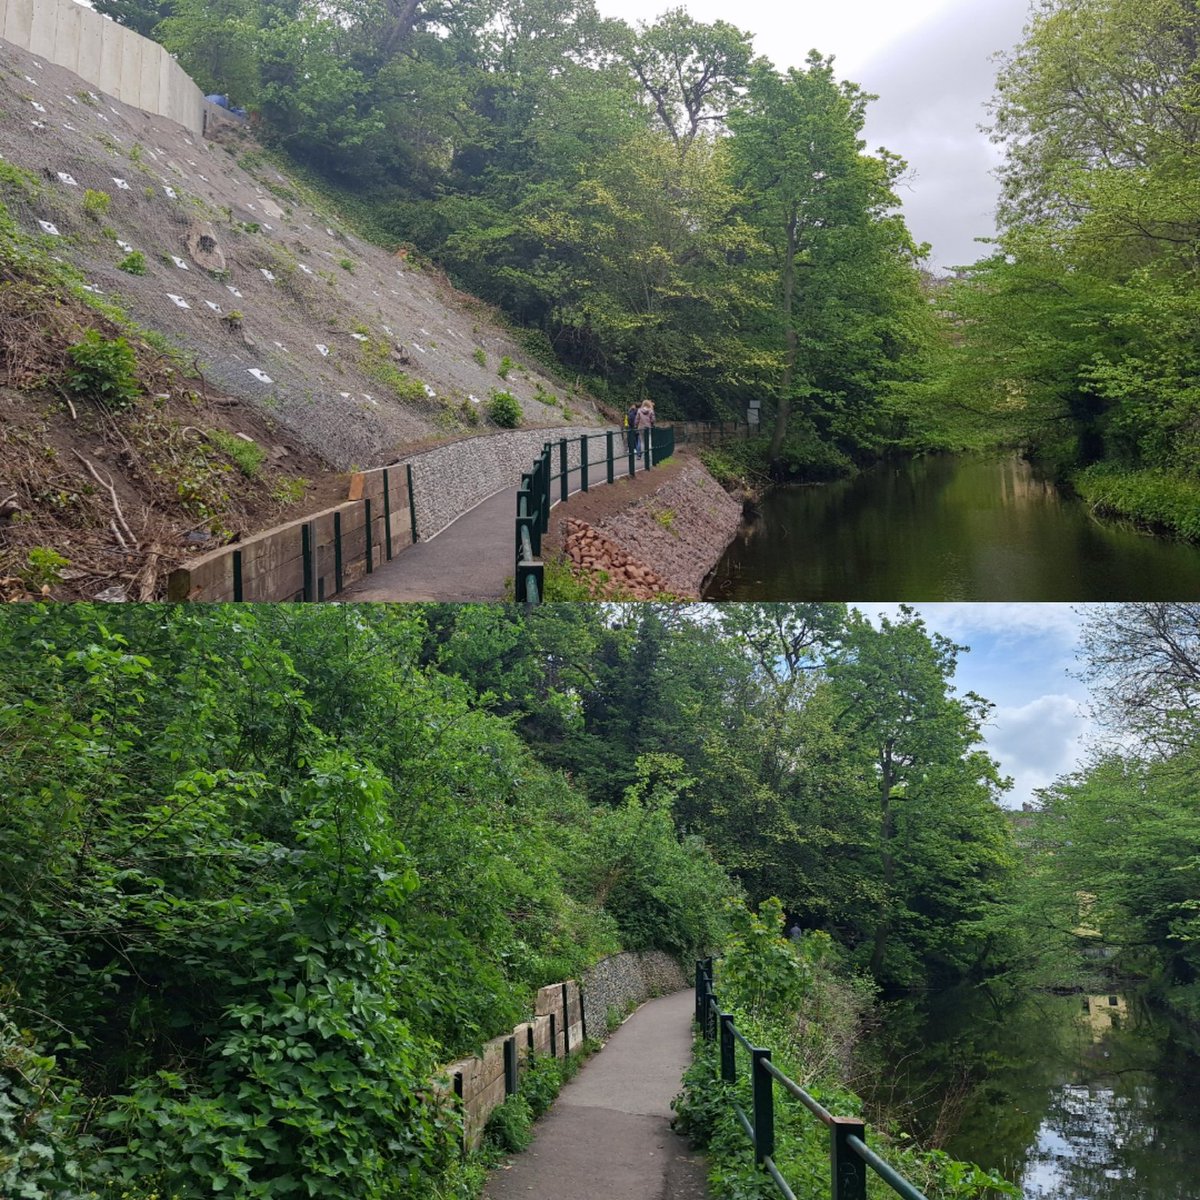 Two years since the Dean Path landslide was opened, amazing to see how nature has reclaimed the bank..was also buzzing with bees and full of bird life